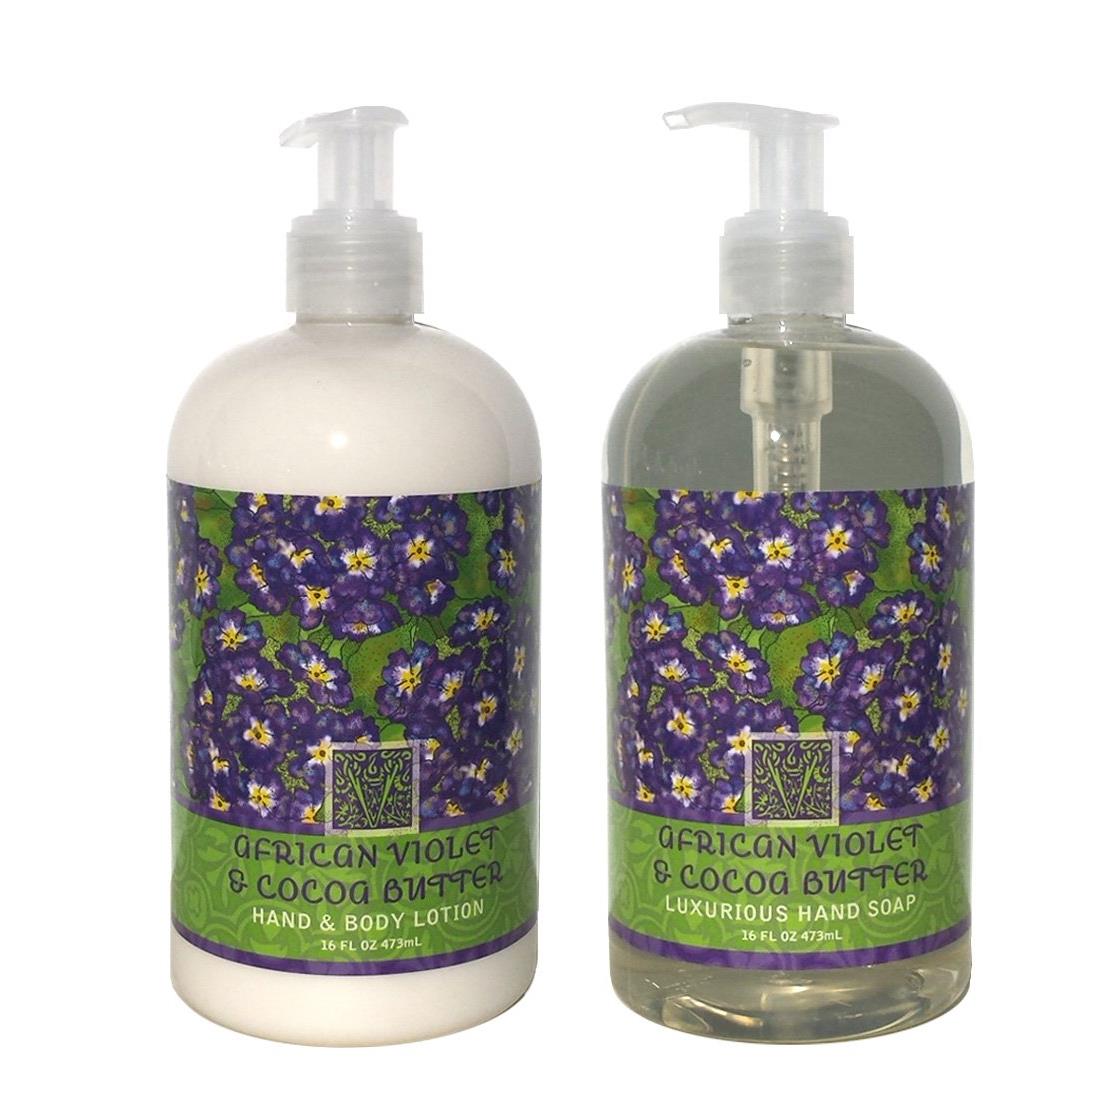 Greenwich Bay AFRICAN VIOLET COCOA BUTTER Hand & Body Lotion and Hand Soap Duo Set Enriched With Shea Butter 16 oz ea.